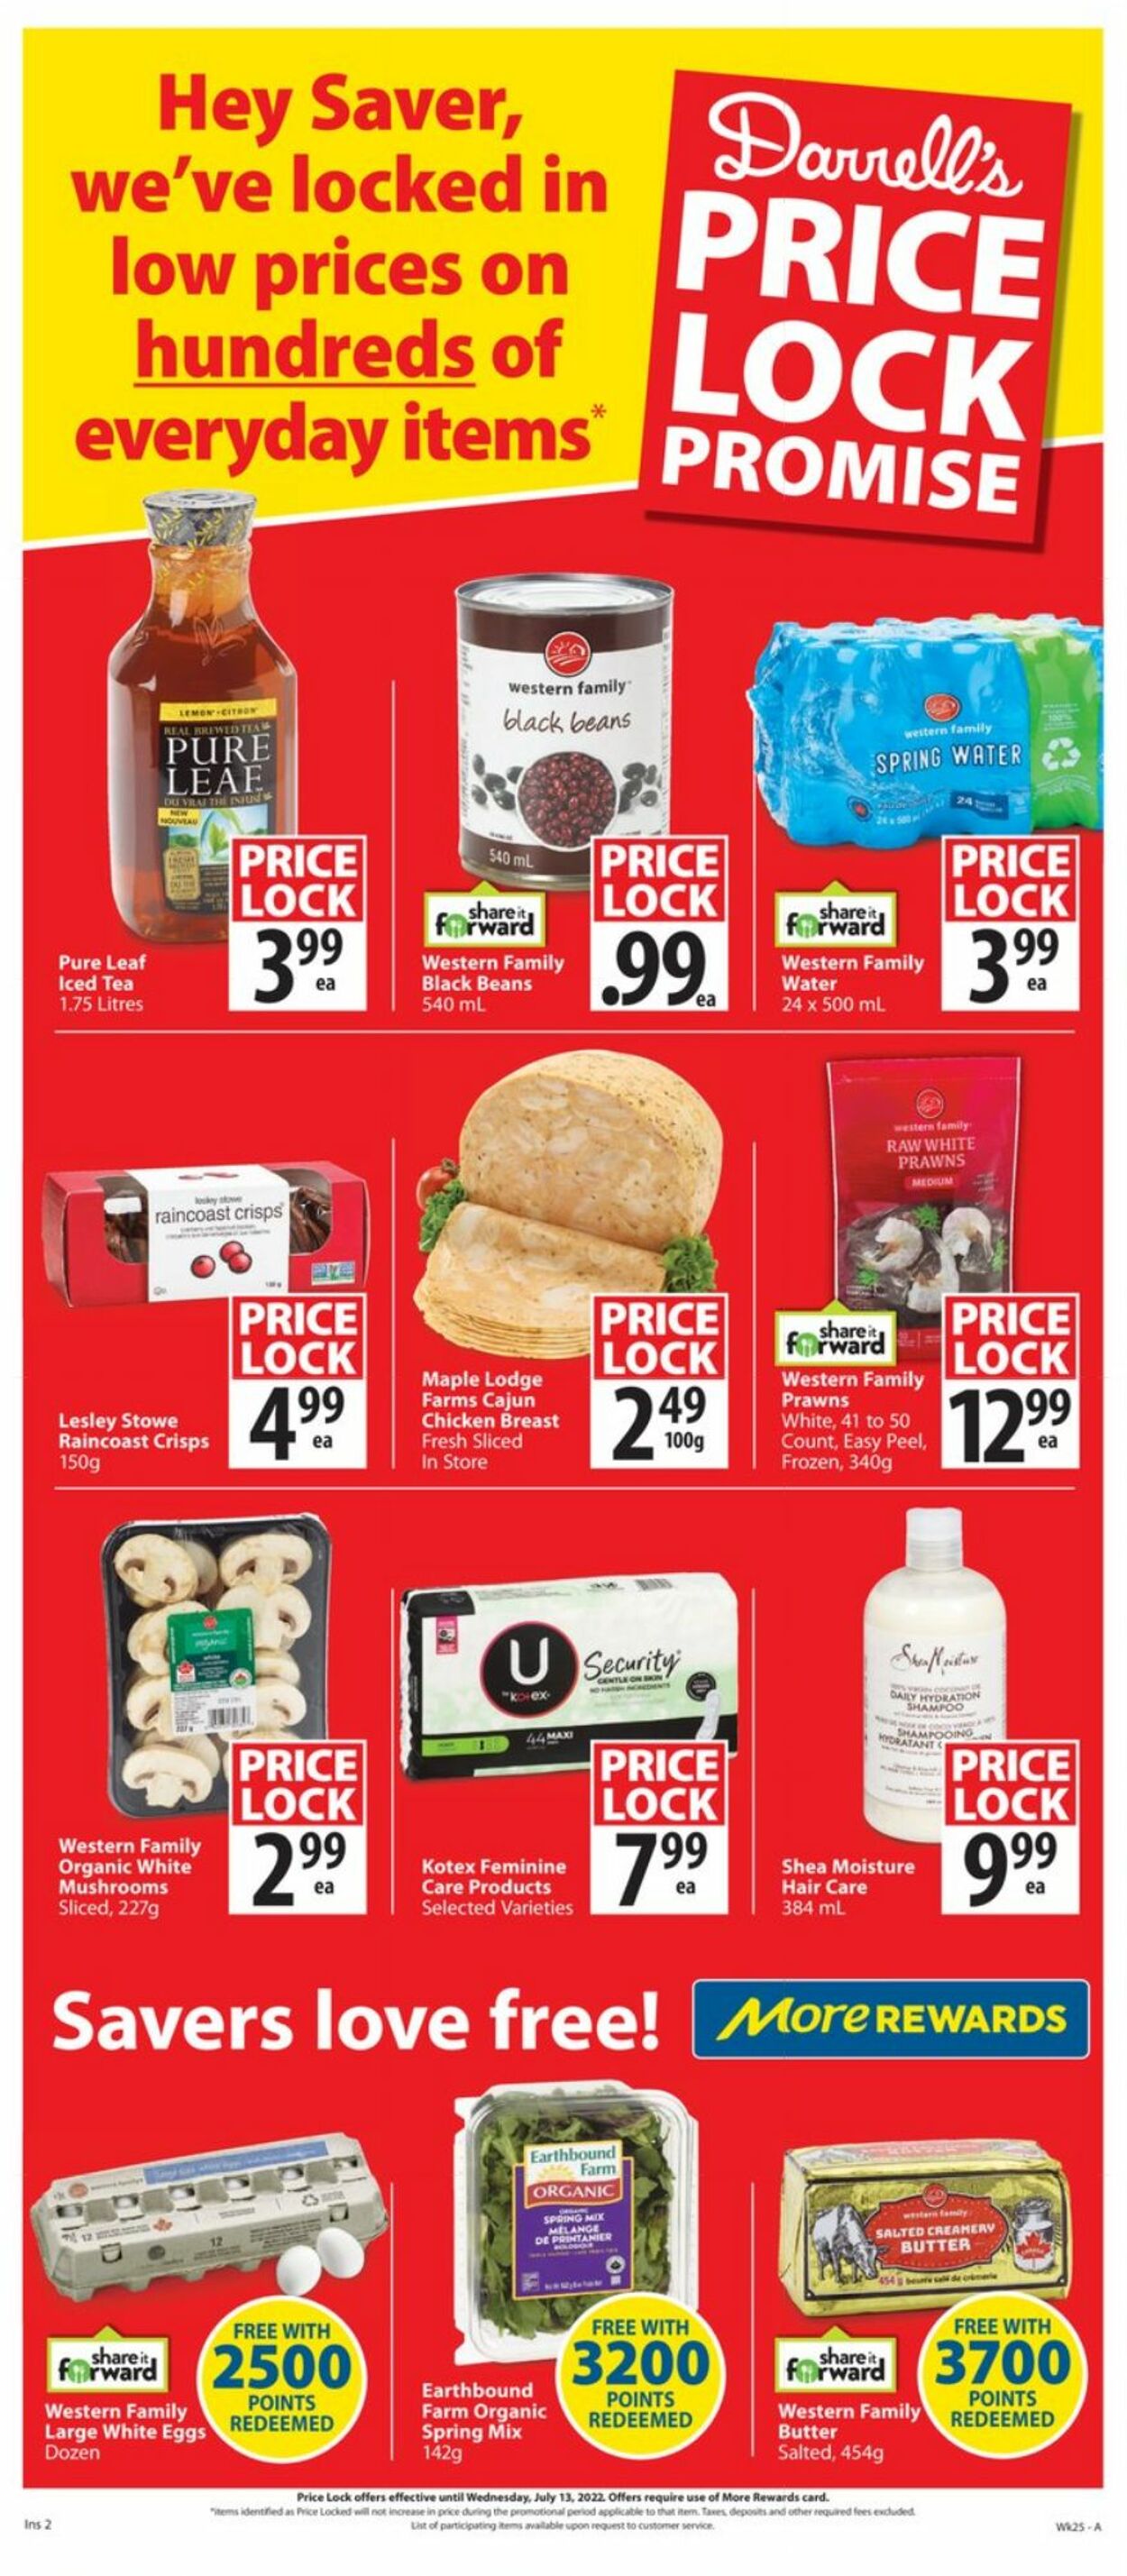 Flyer Save-On-Foods 16.06.2022 - 22.06.2022